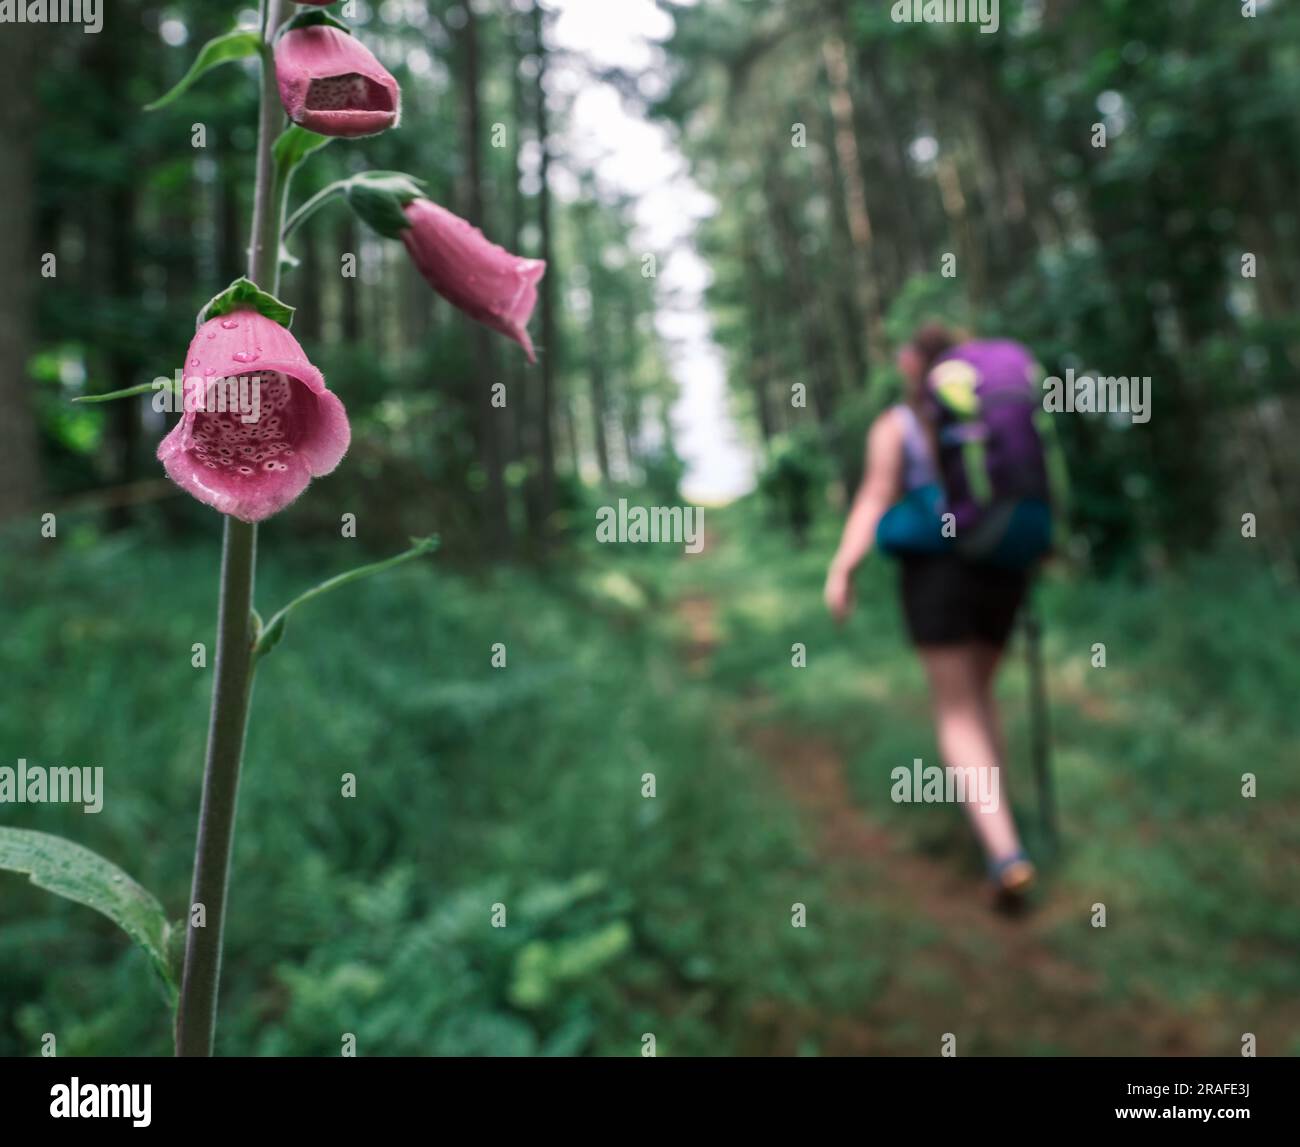 A Woman Hiking A Forest Trail WIth A Foxglove Flower In The Foreground Stock Photo